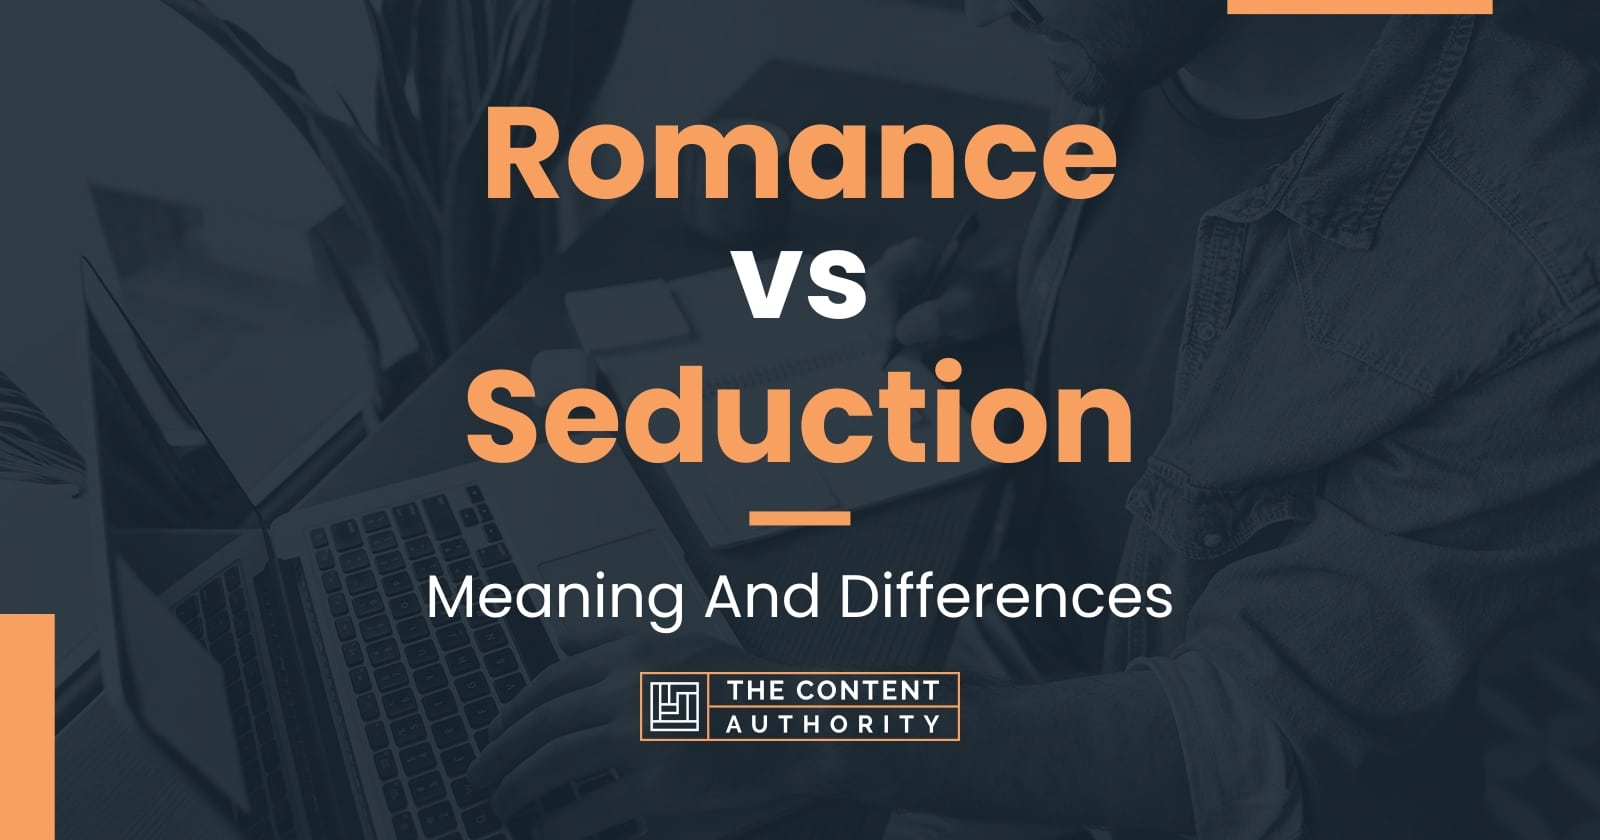 Romance Vs Seduction Meaning And Differences 3460